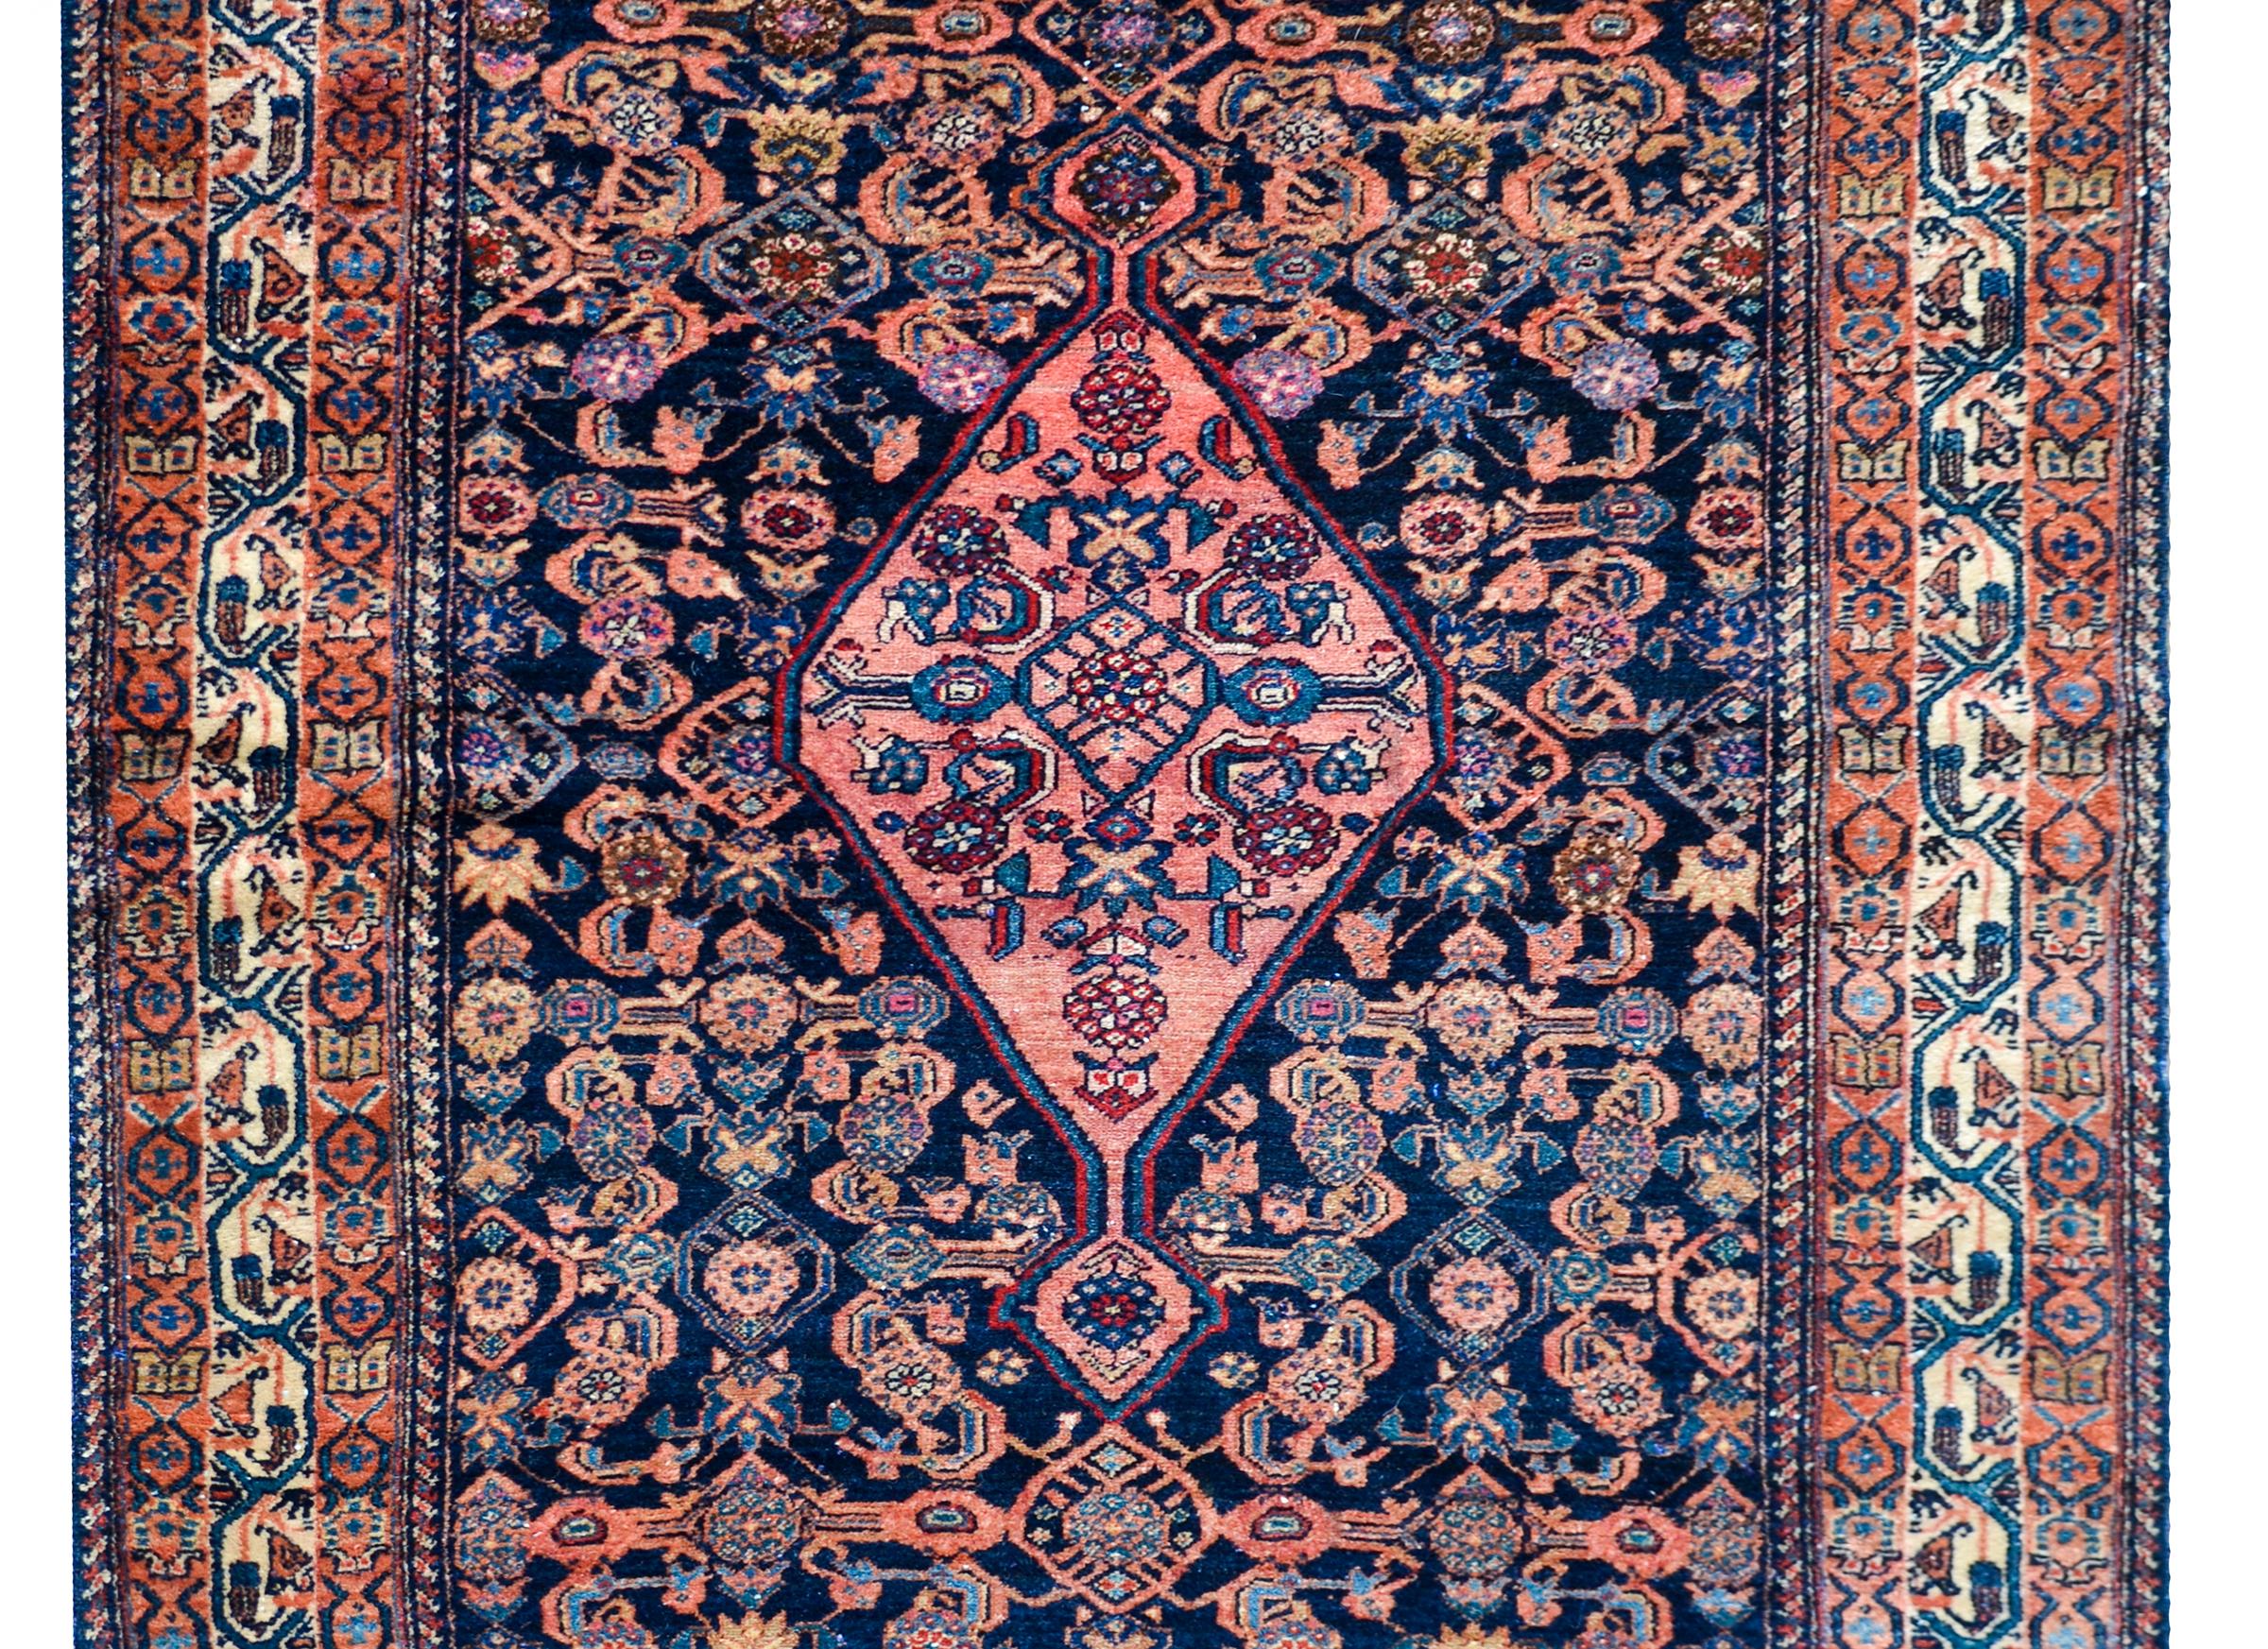 A fantastic early 20th century Persian Bibikibad rug with a central diamond floral medallion amidst a field of stylized flowers and vines, all woven in wonderful pinks, indigos, crimsons, and creams against a dark indigo background, and surrounded